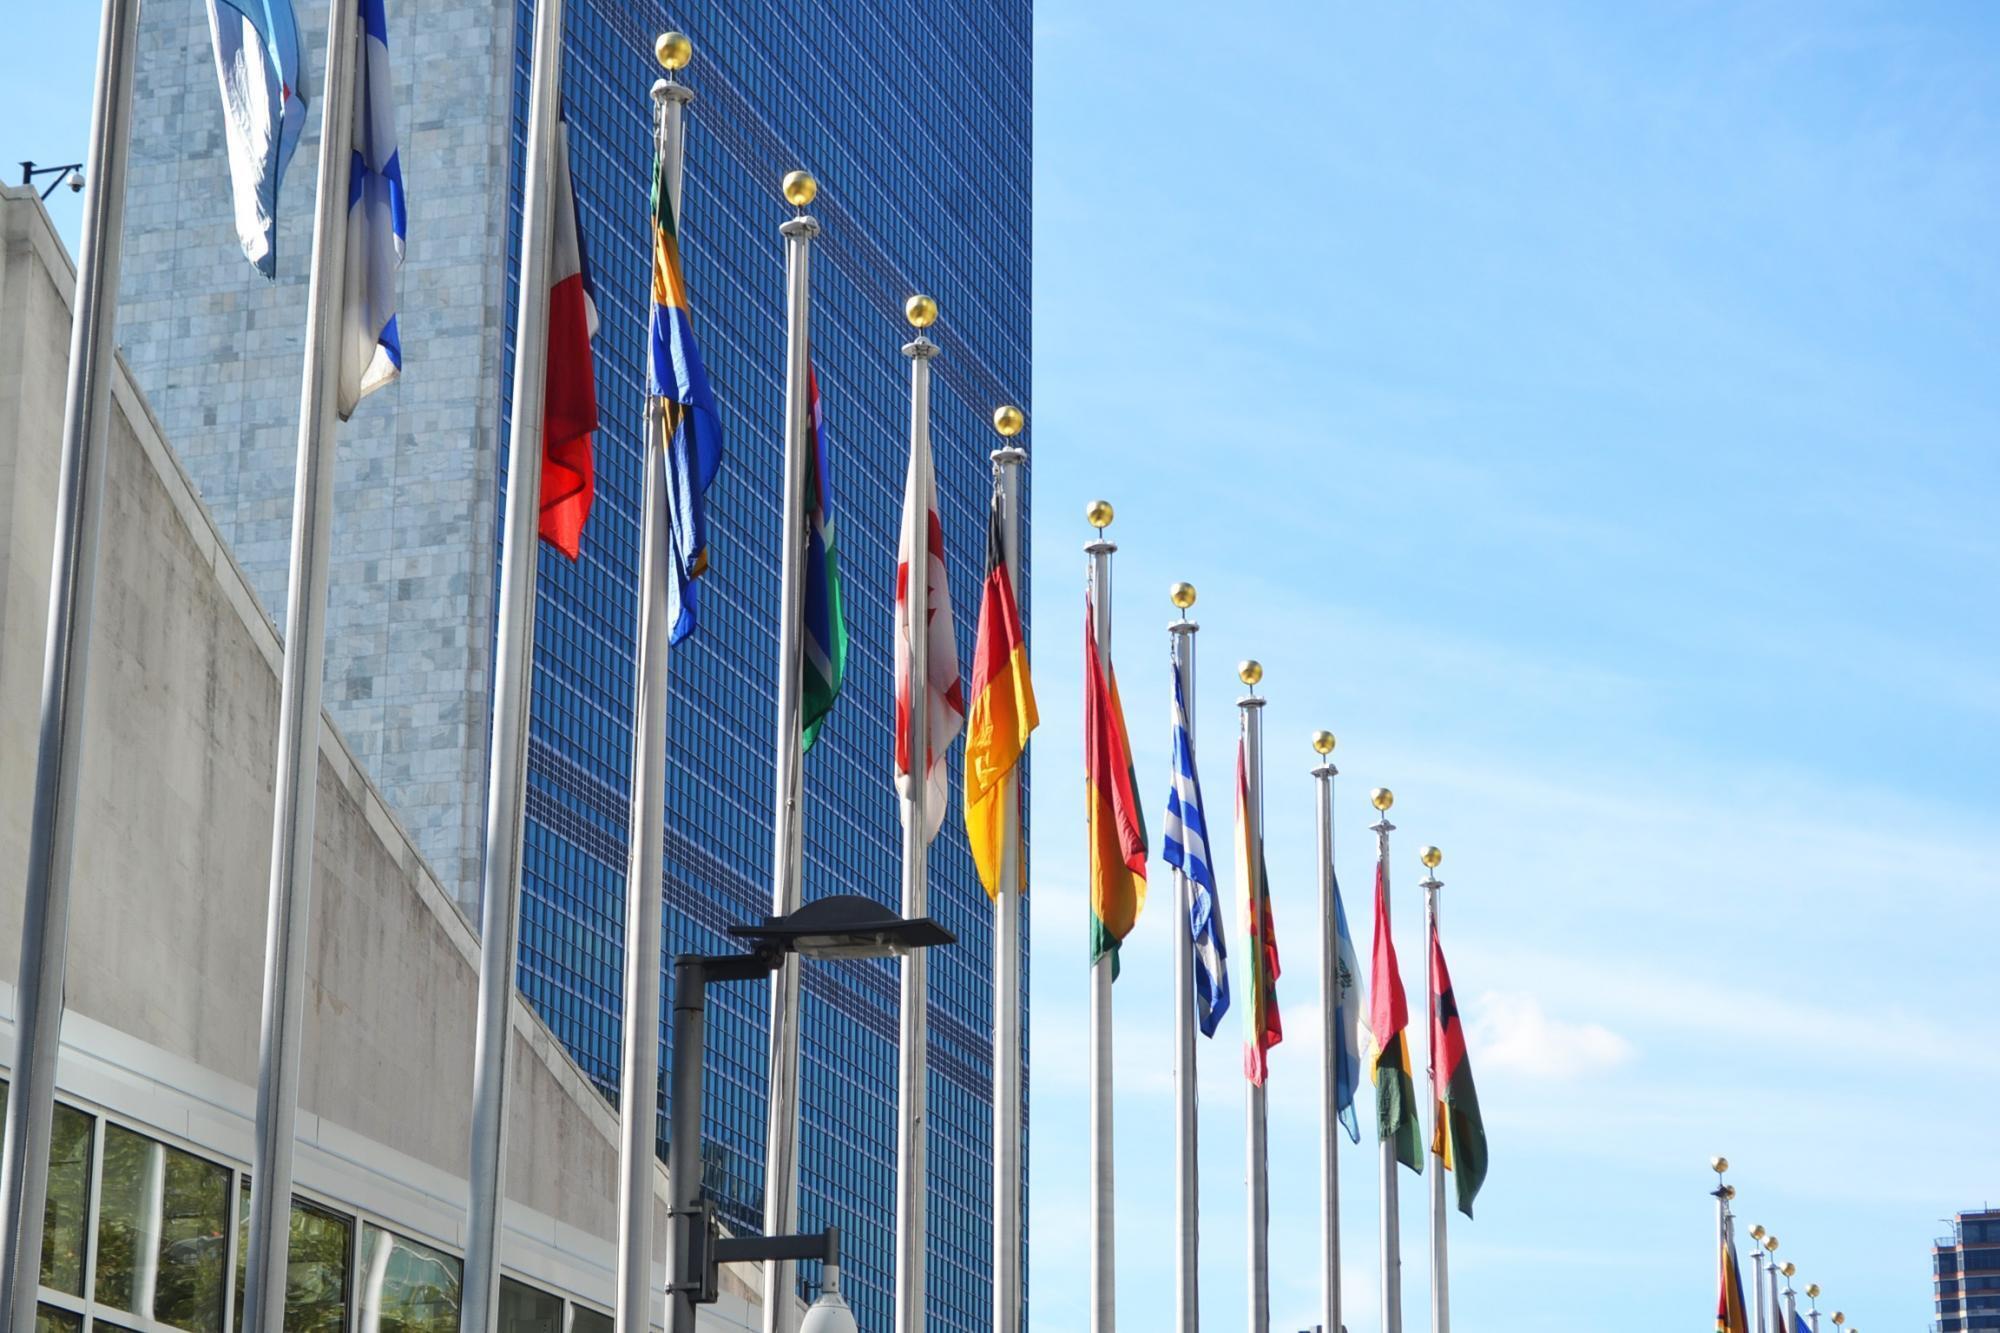 Flags in front of the United Nations building in New York